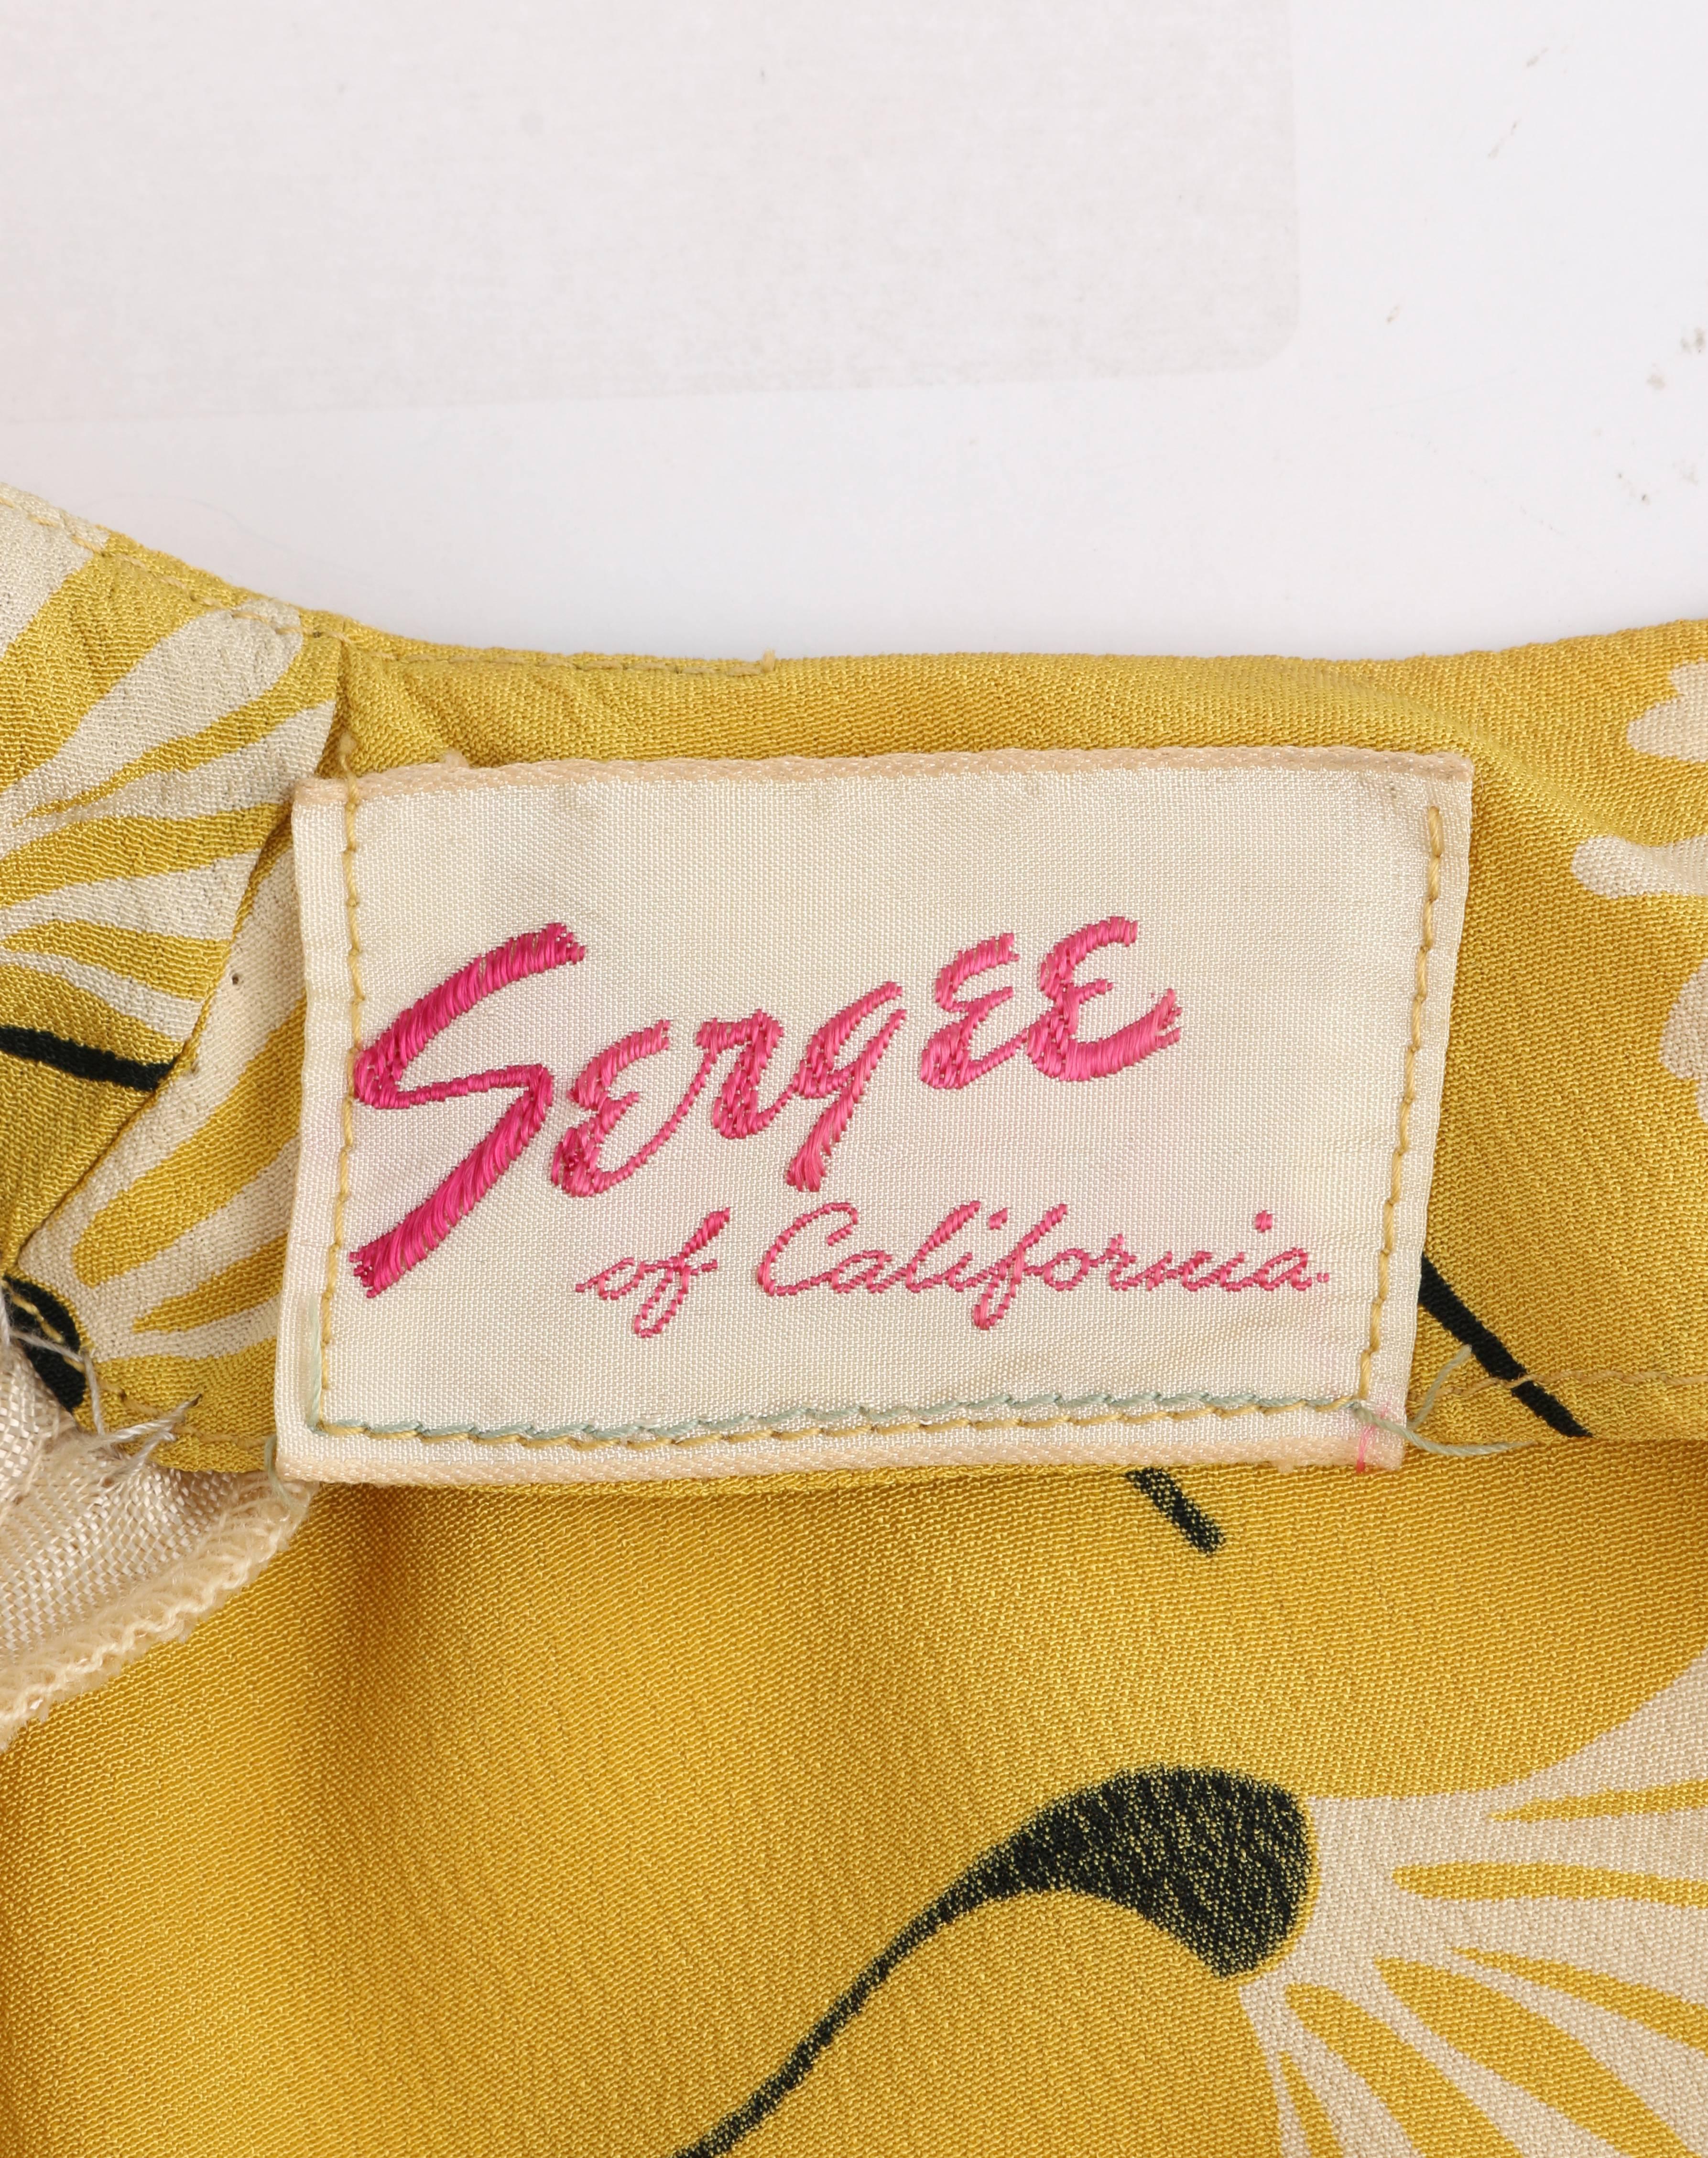 Women's SERGEE OF CALIFORNIA c.1940's Yellow Daisy Floral Print Rayon Crepe Day Dress For Sale